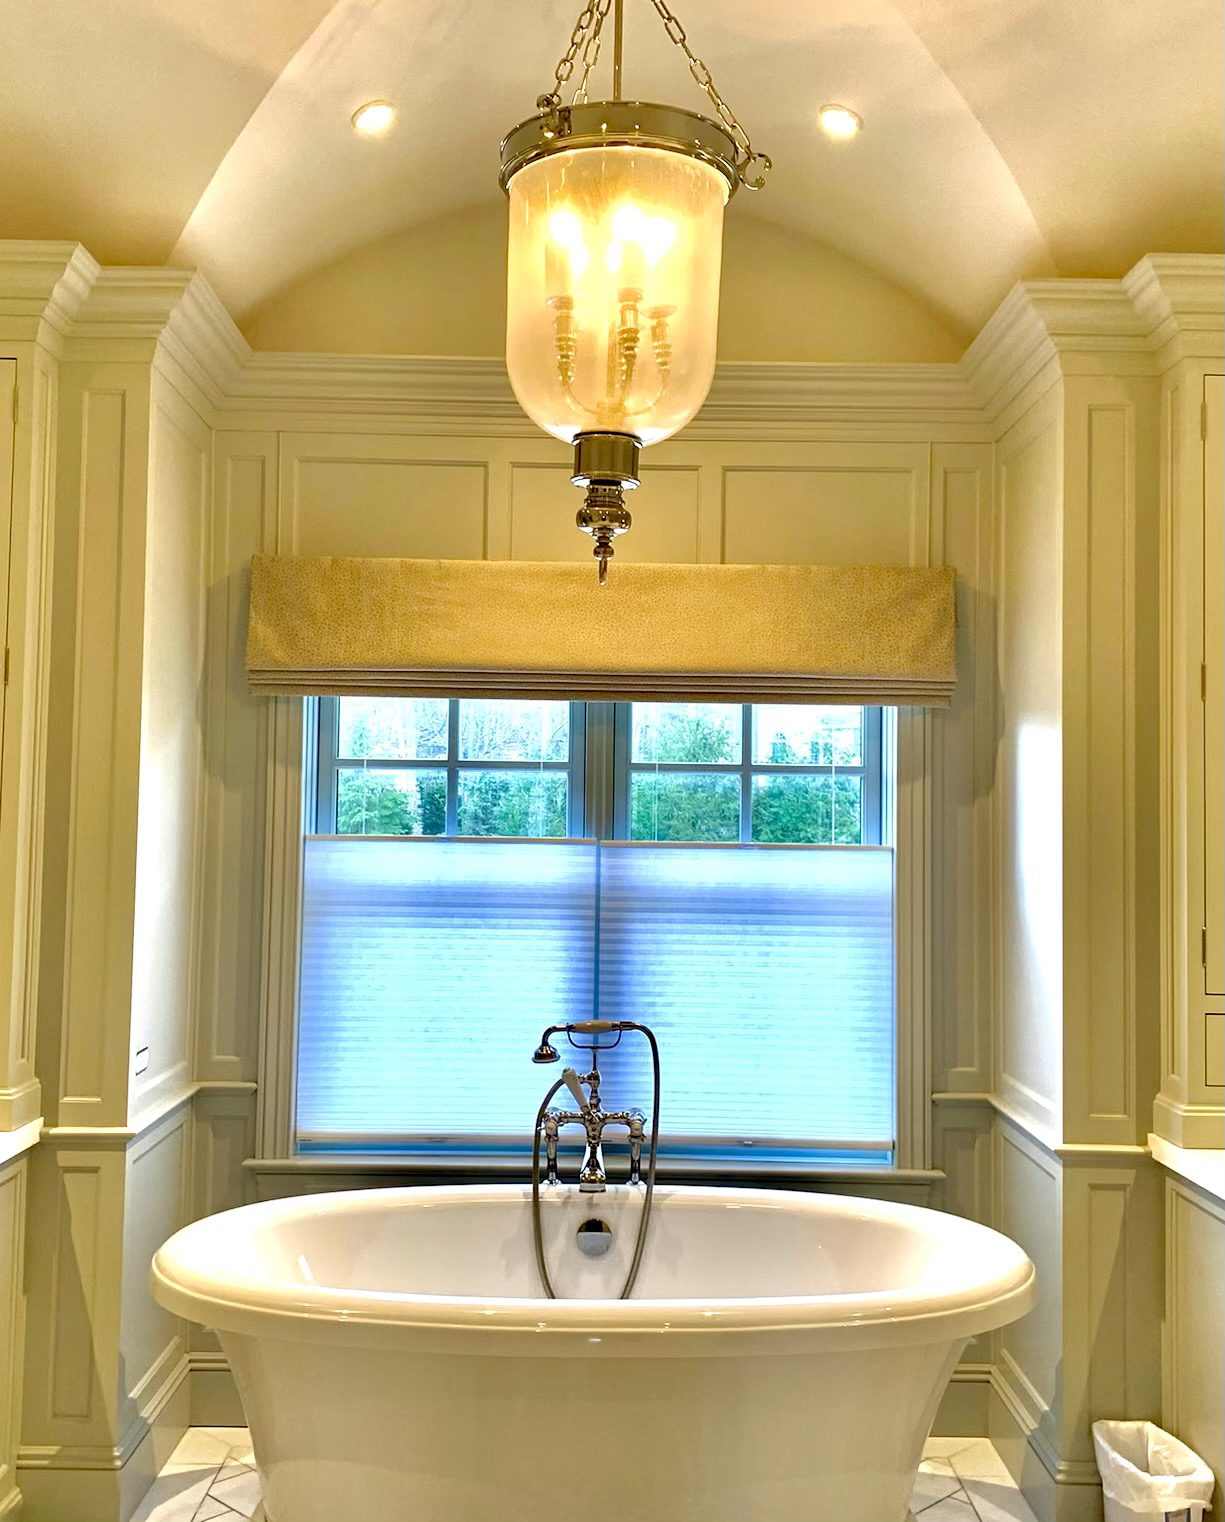 Roman Shade Valance with Top Down/Bottom Up Norman Cellular Shade in Master Bathroom